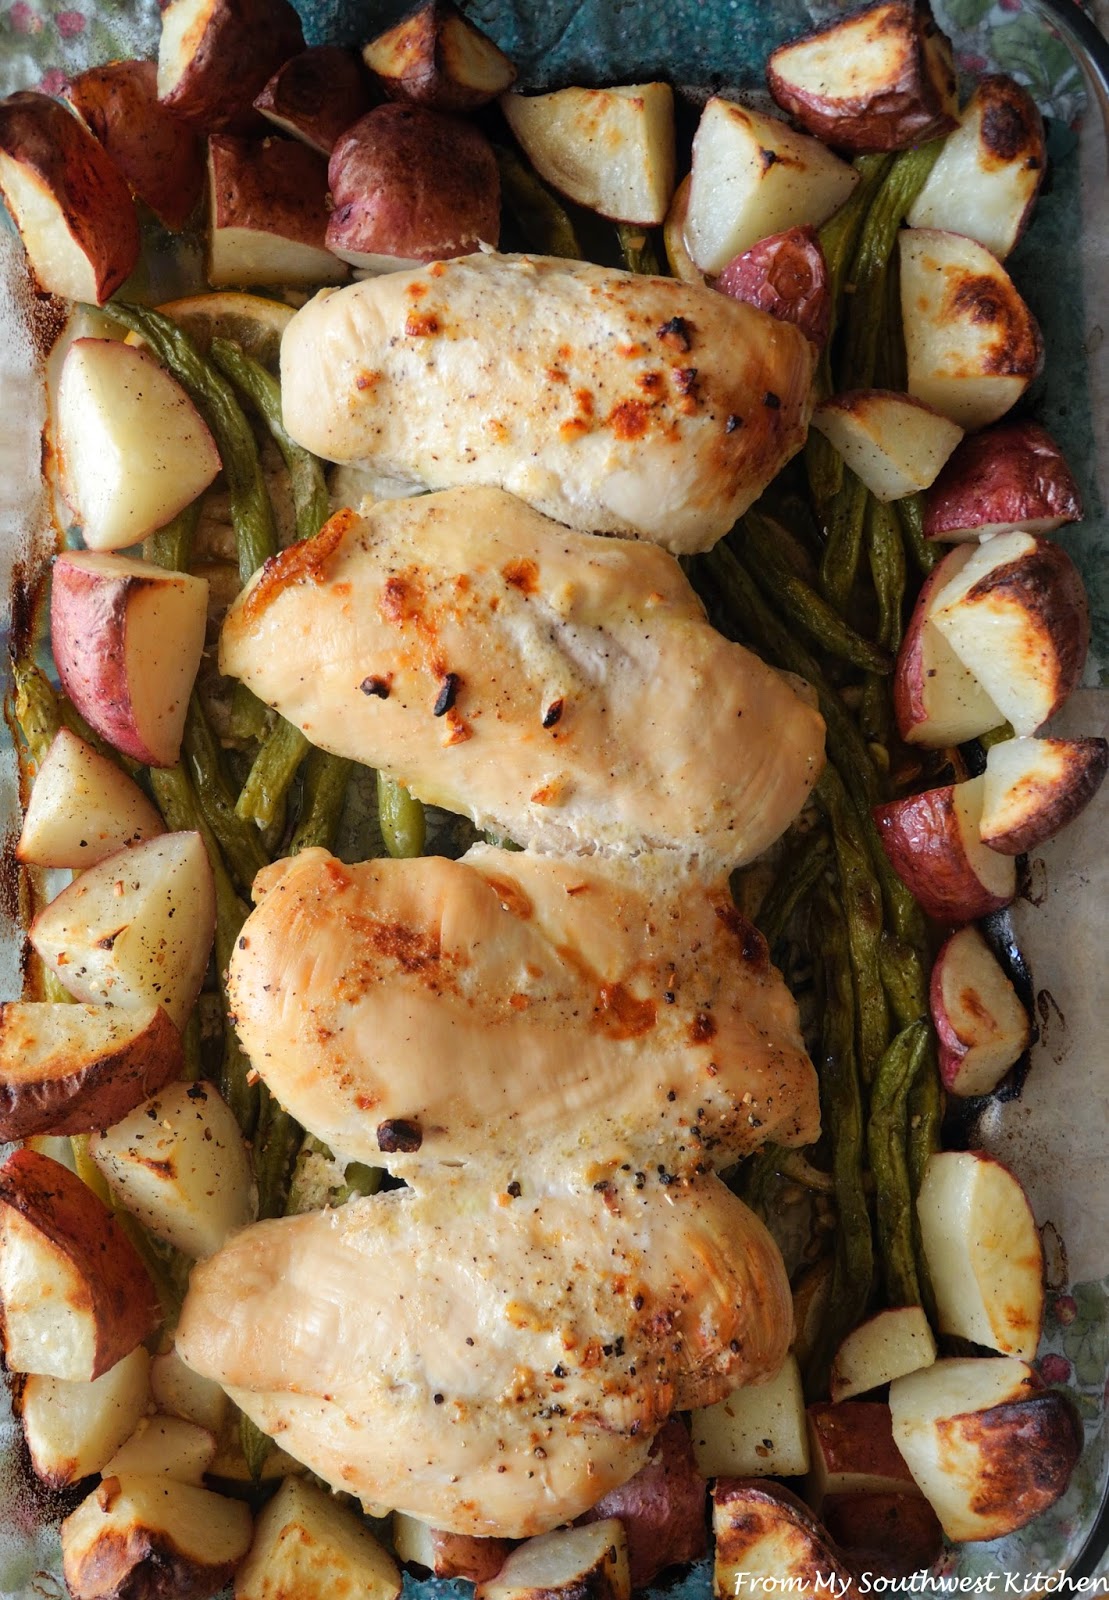 From My Southwest Kitchen: Pan-Roasted Chicken With Lemon Garlic-Green ...